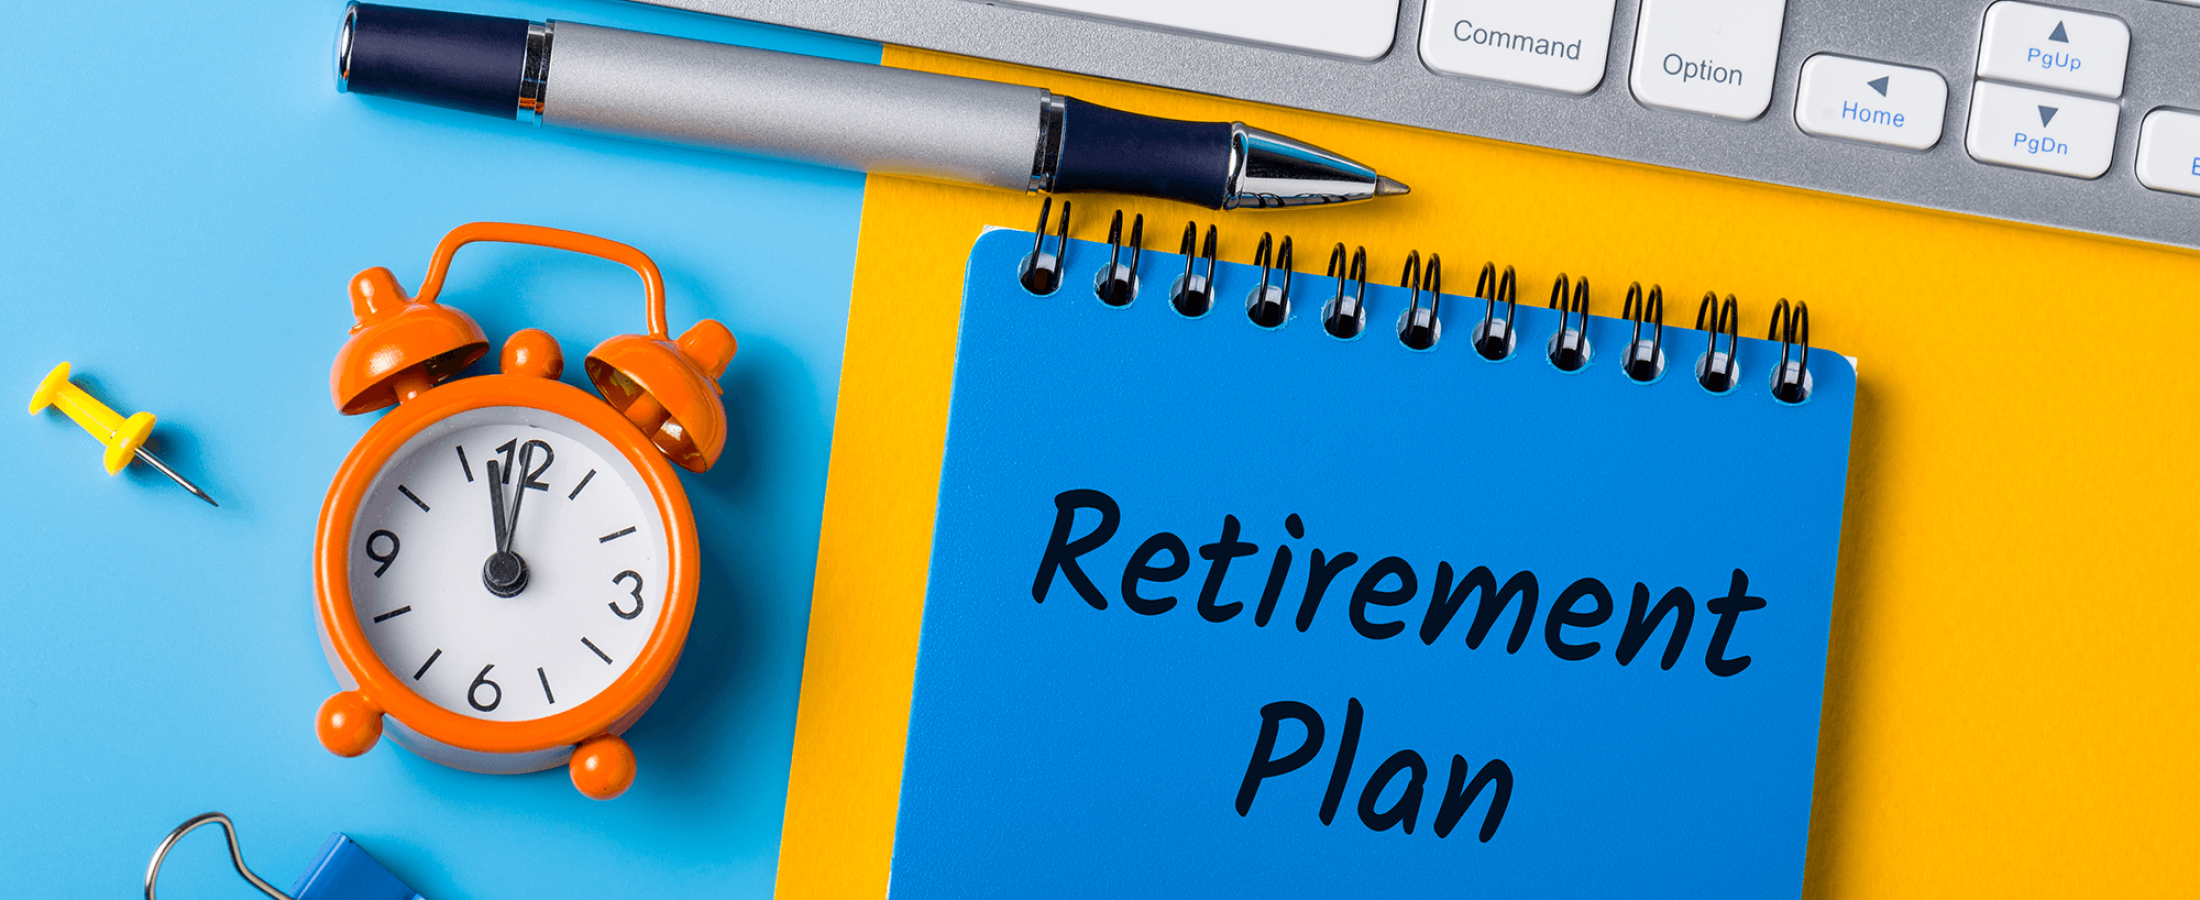 Things you can do when your retirement savings just isn’t enough